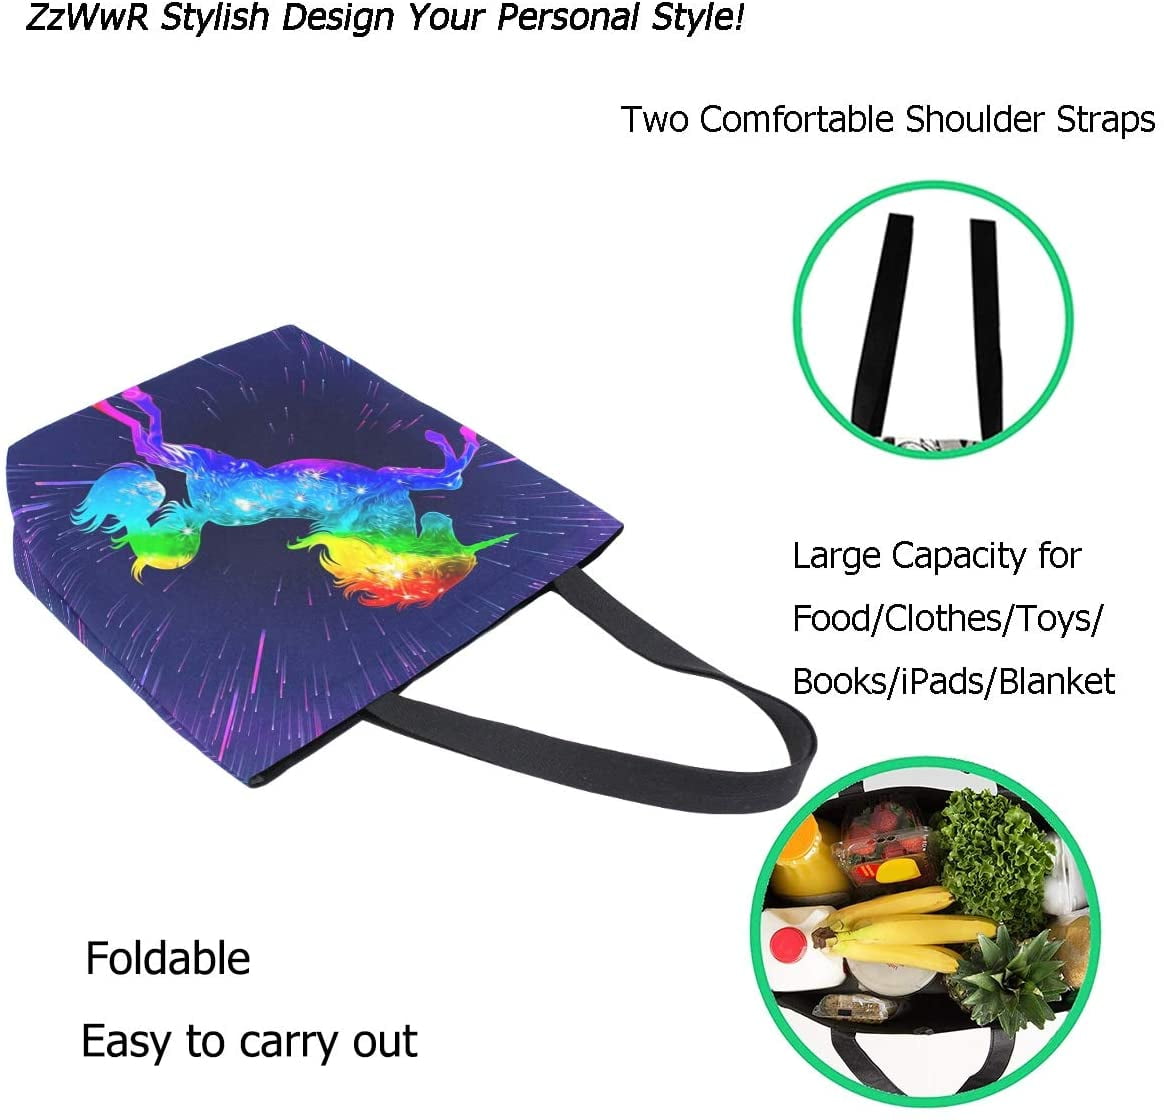 ZzWwR Fresh Green Shamrock Ladybug Print Extra Large Canvas Shoulder Tote Top Storage Handle Bag for Gym Beach Weekender Travel Reusable Grocery Shopping 